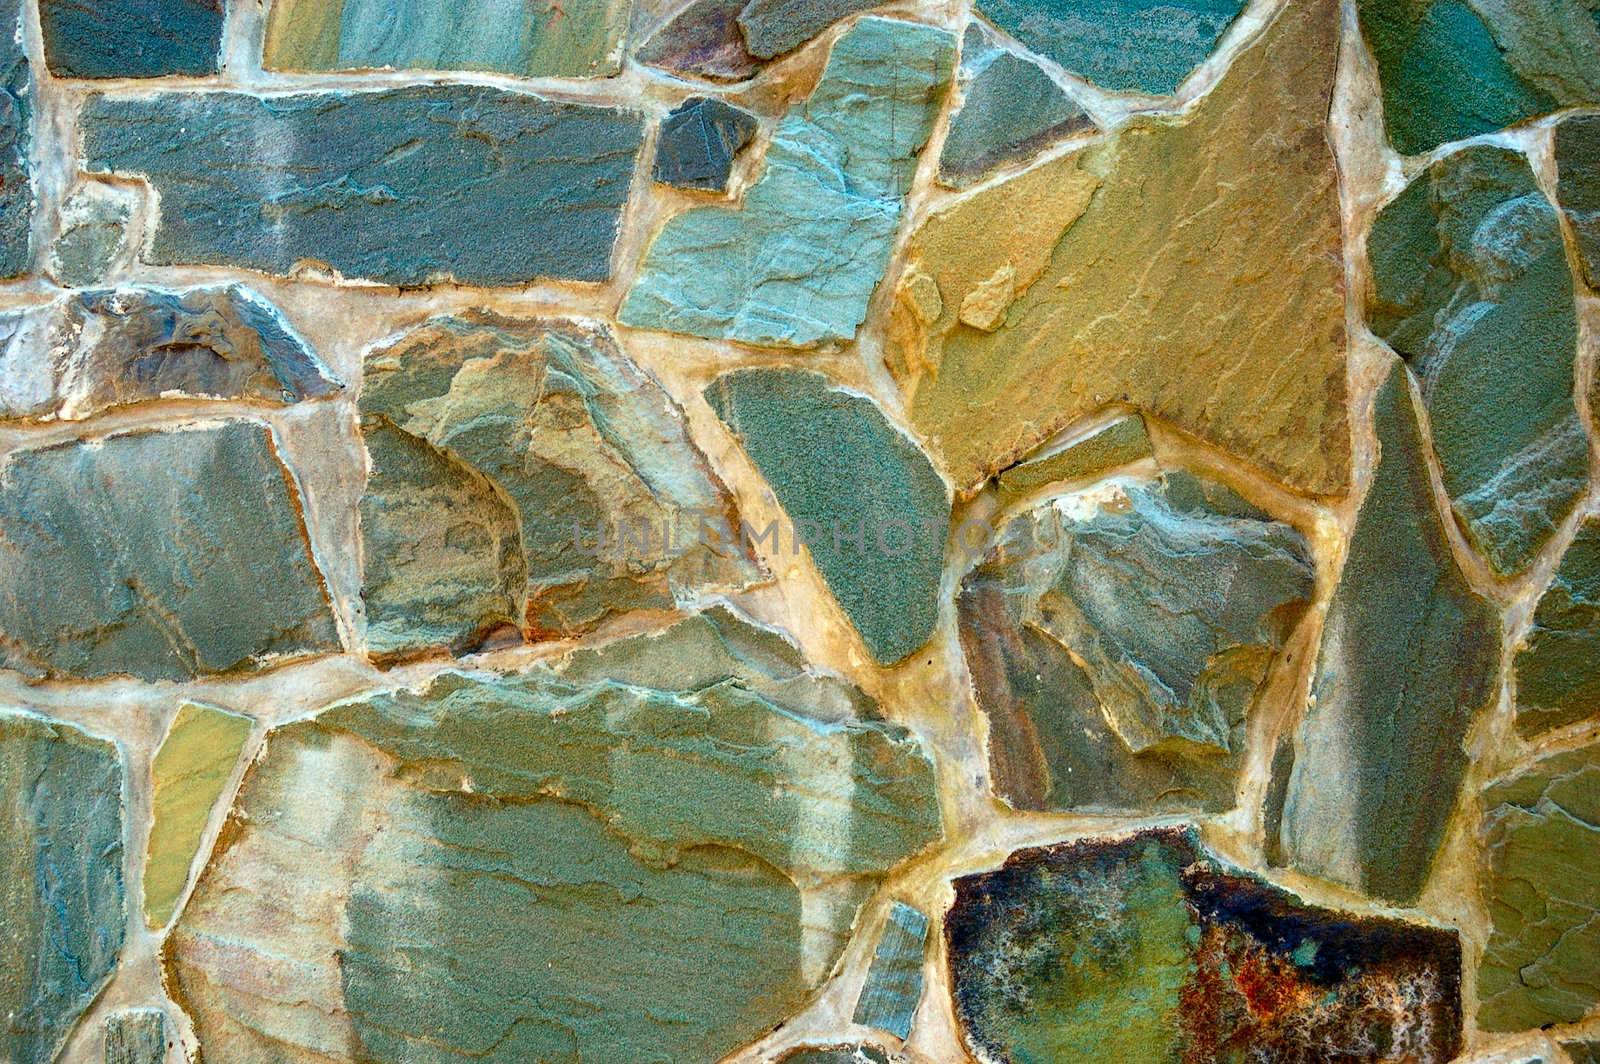 rough wall surface made of wild stones